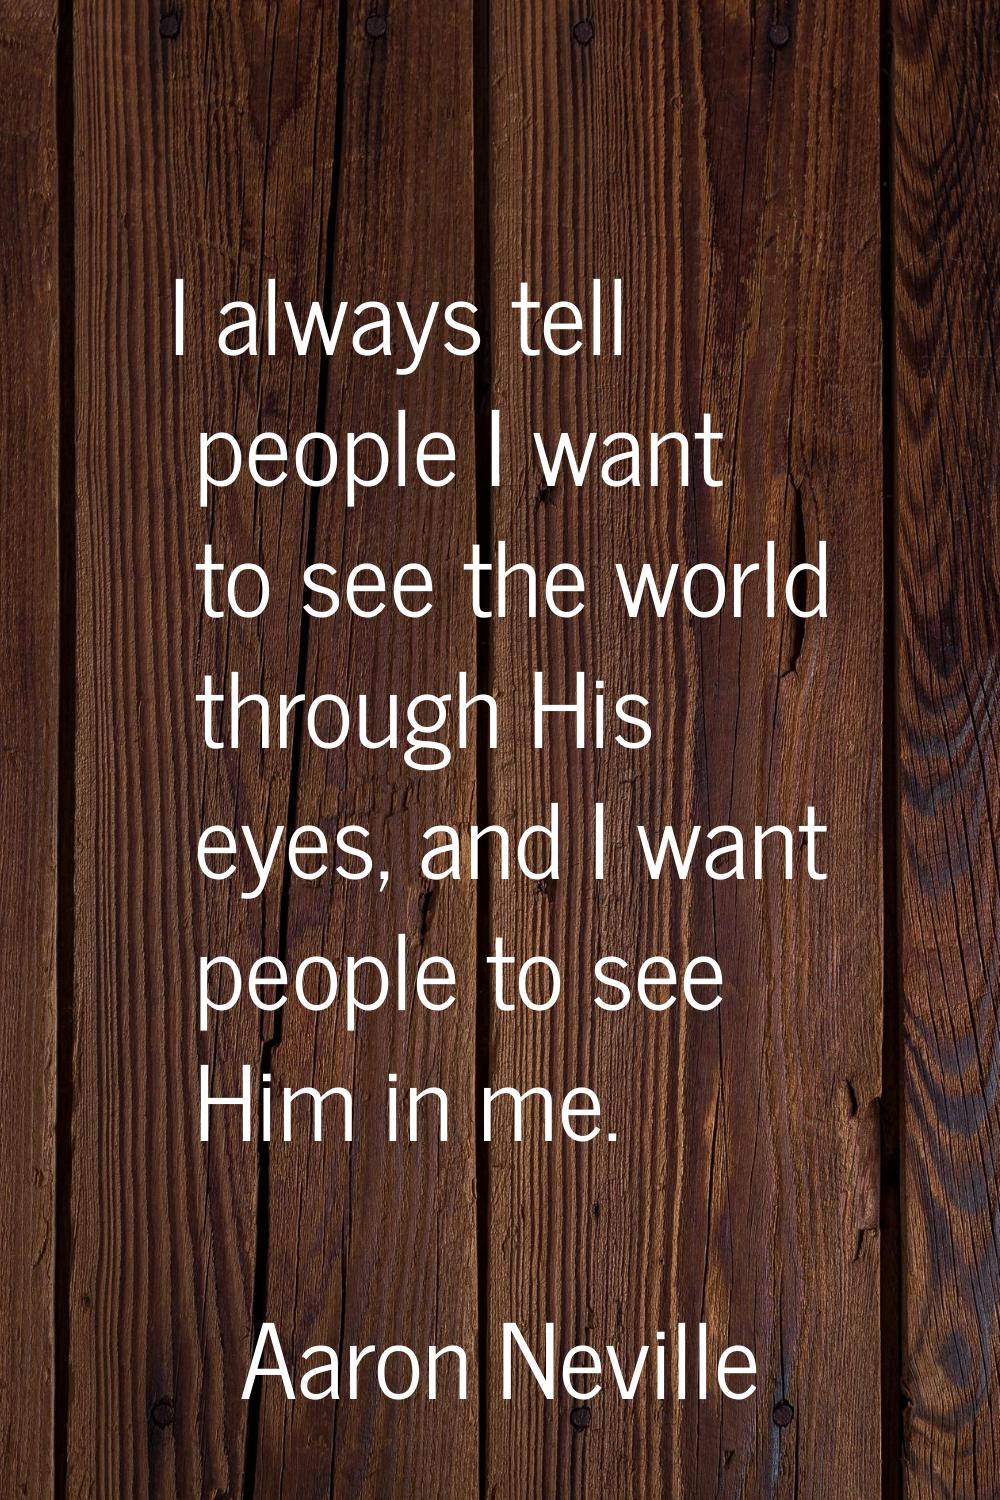 I always tell people I want to see the world through His eyes, and I want people to see Him in me.